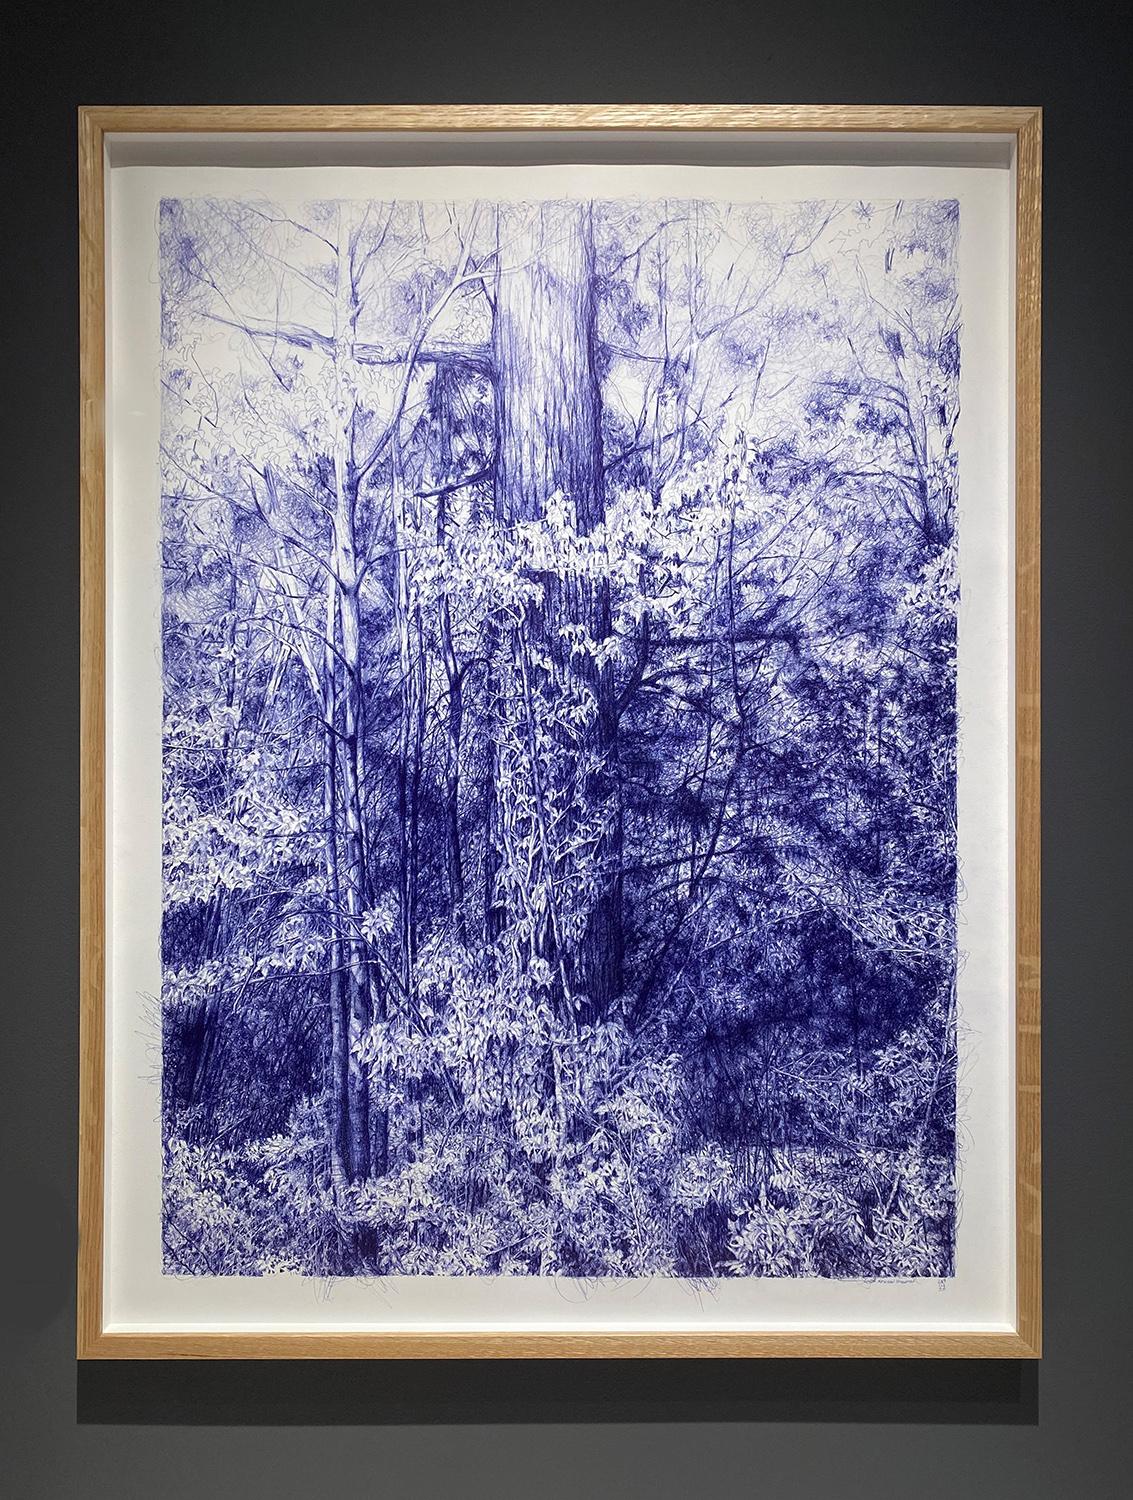 Oracle of Bastet (Blue Ballpoint Pen Drawing of Forested Landscape with Trees) - Art by Linda Newman Boughton